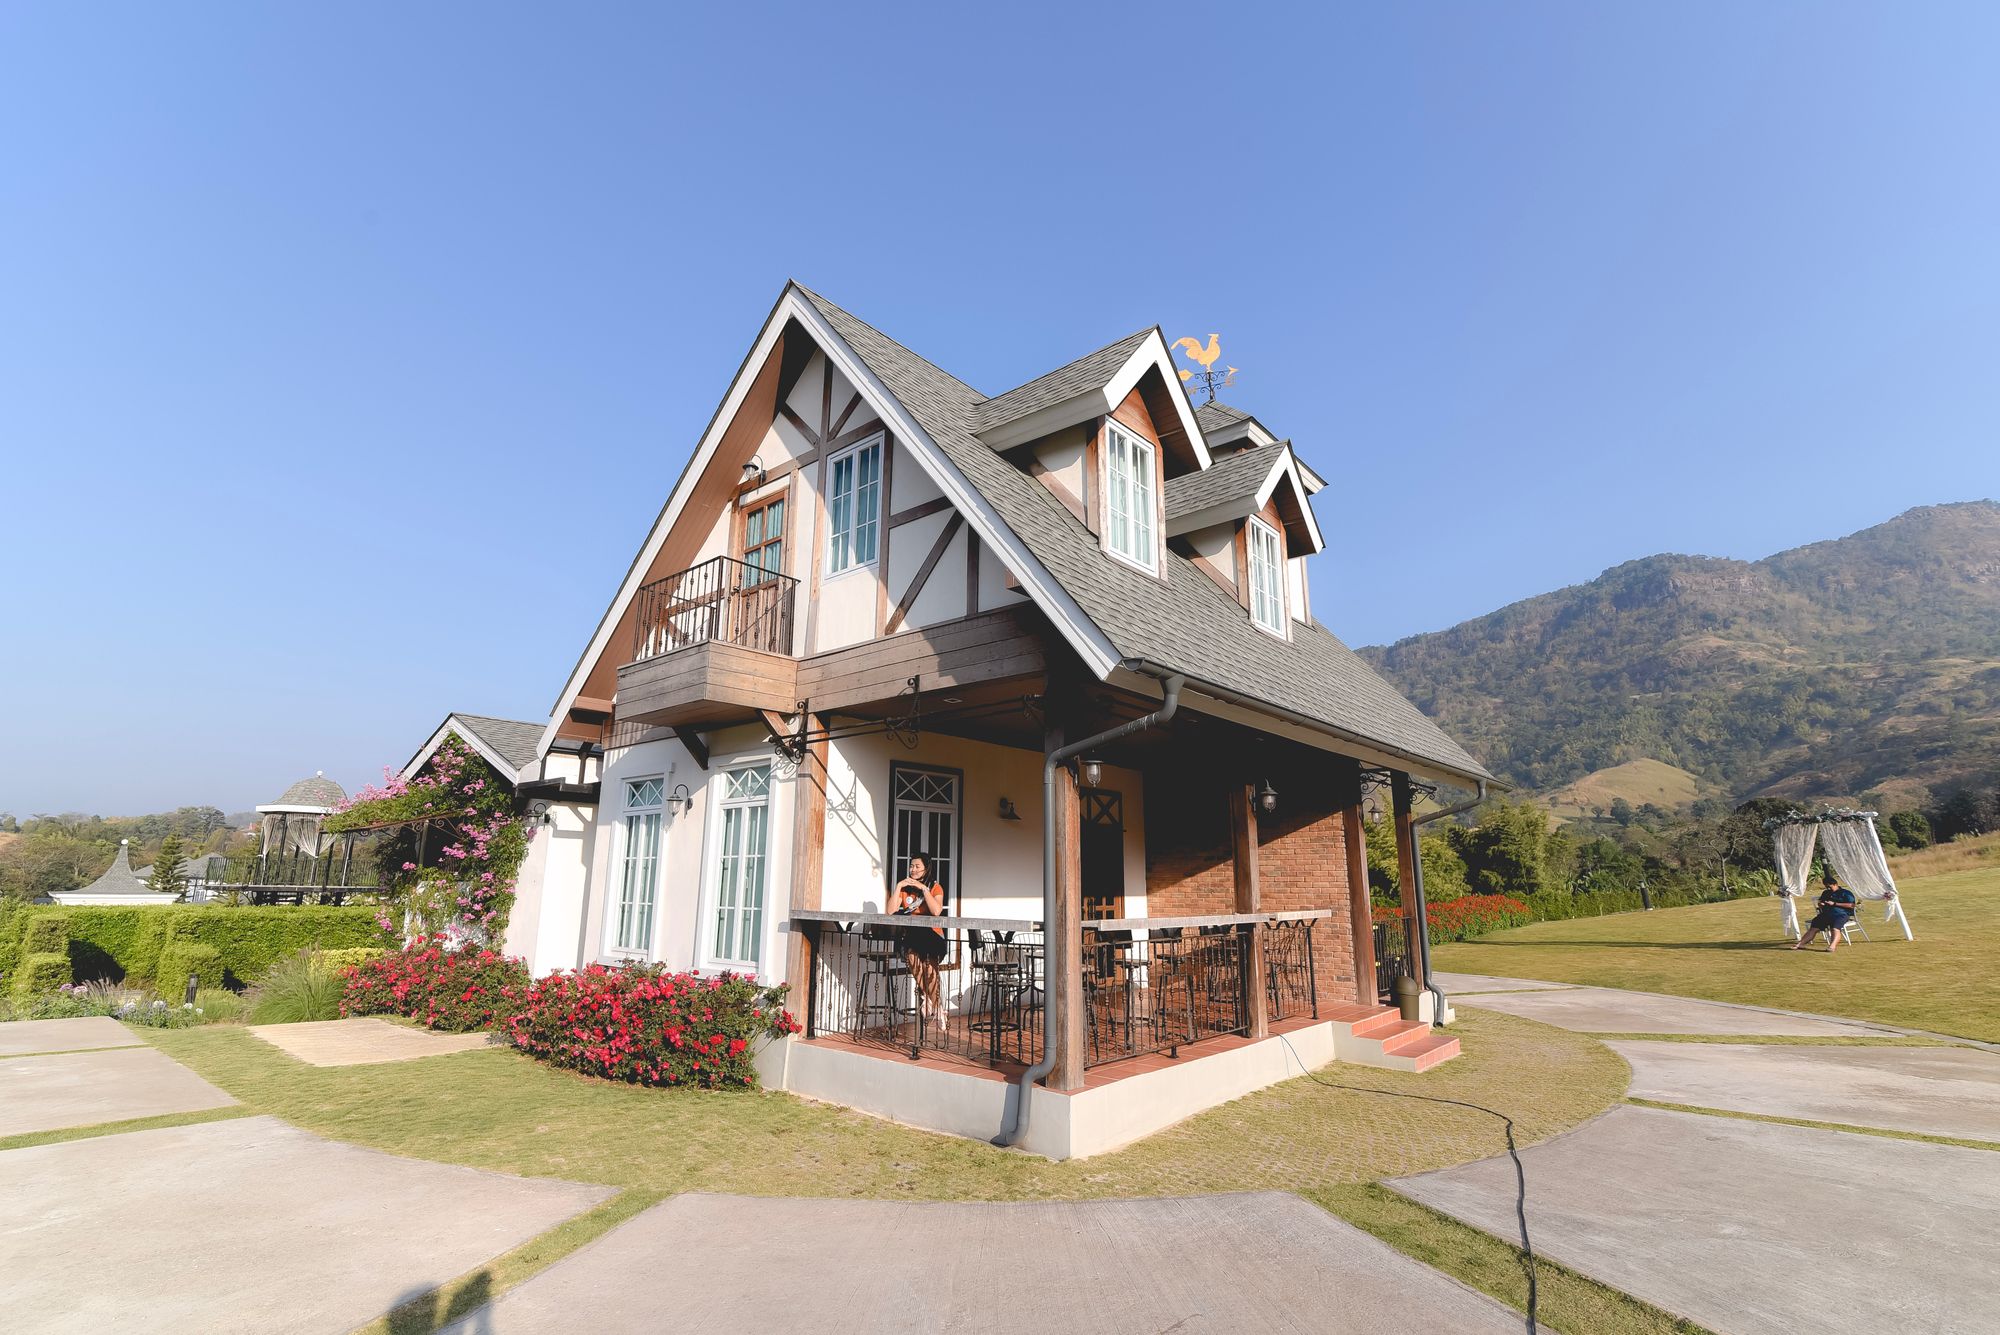 Bungalow Homes: The History of Bungalows & Where to Find Them